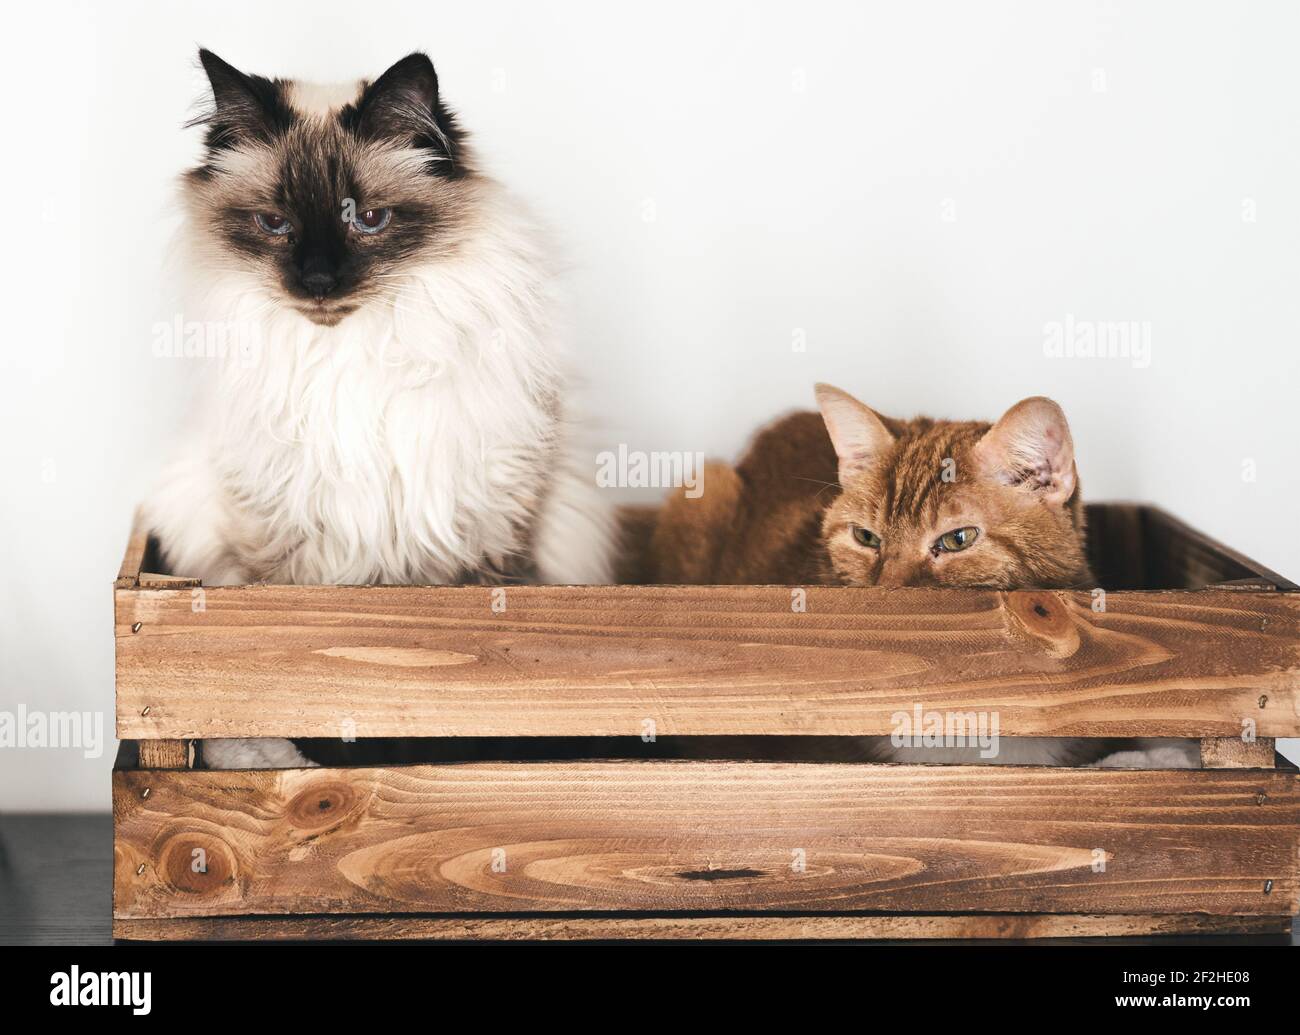 front view of two domestic cats relaxing in wooden box against white wall Stock Photo